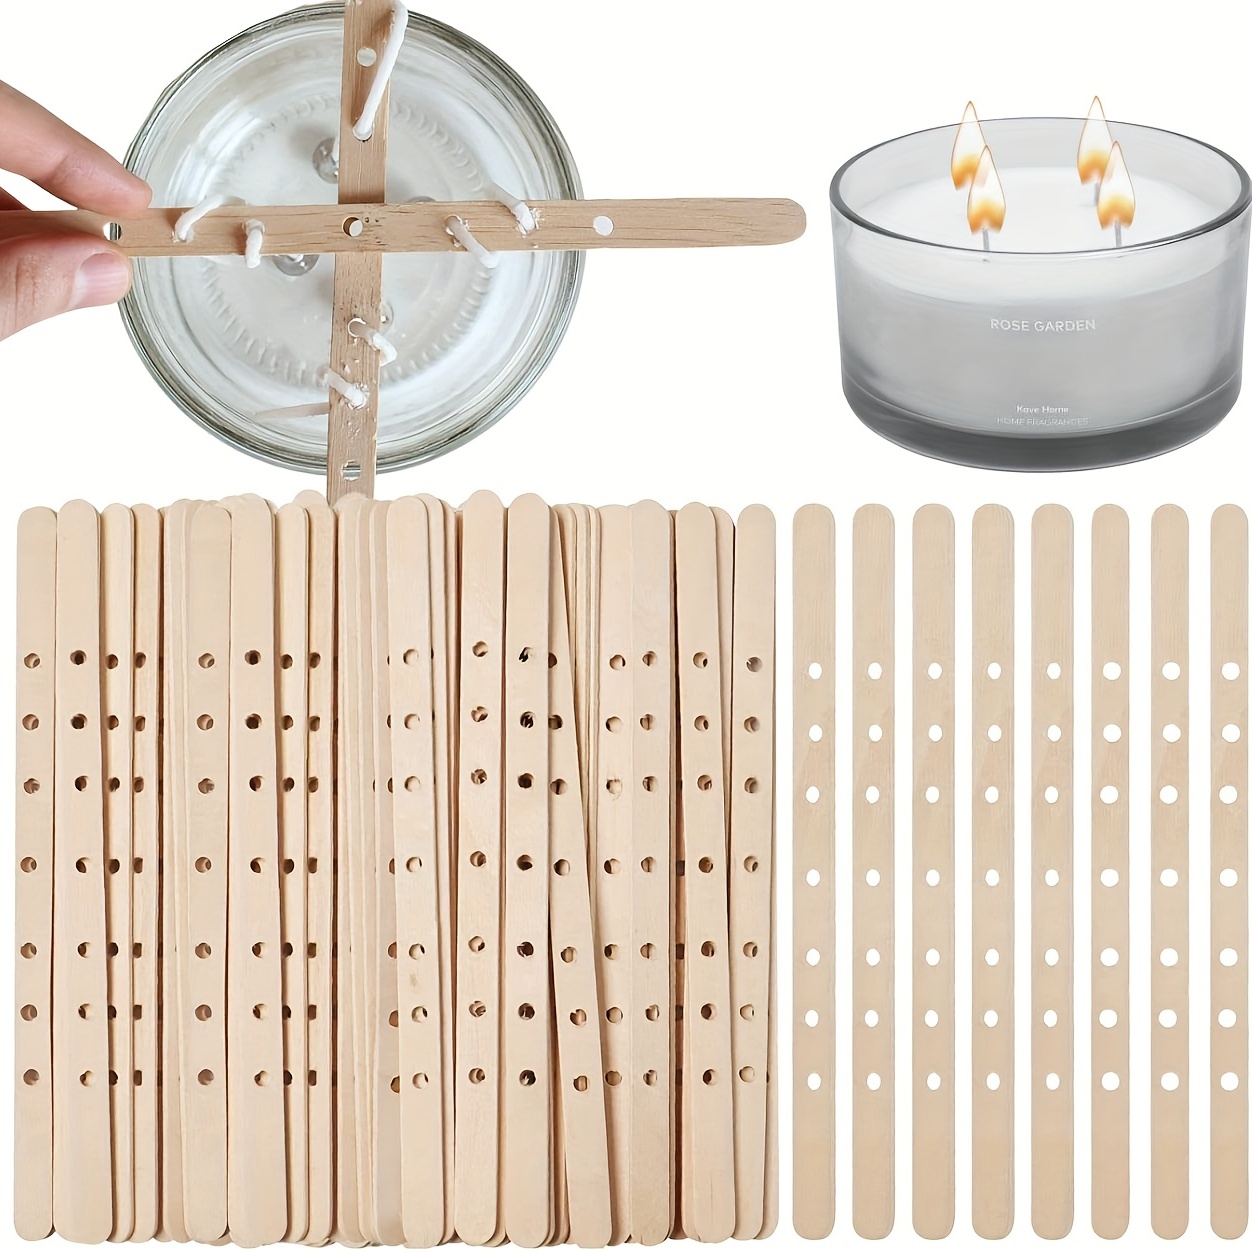 Wooden Candle Wick Holders,Candle Wicks Centering Device,Candle Wick  Bars,Wick Holders for Candle Making